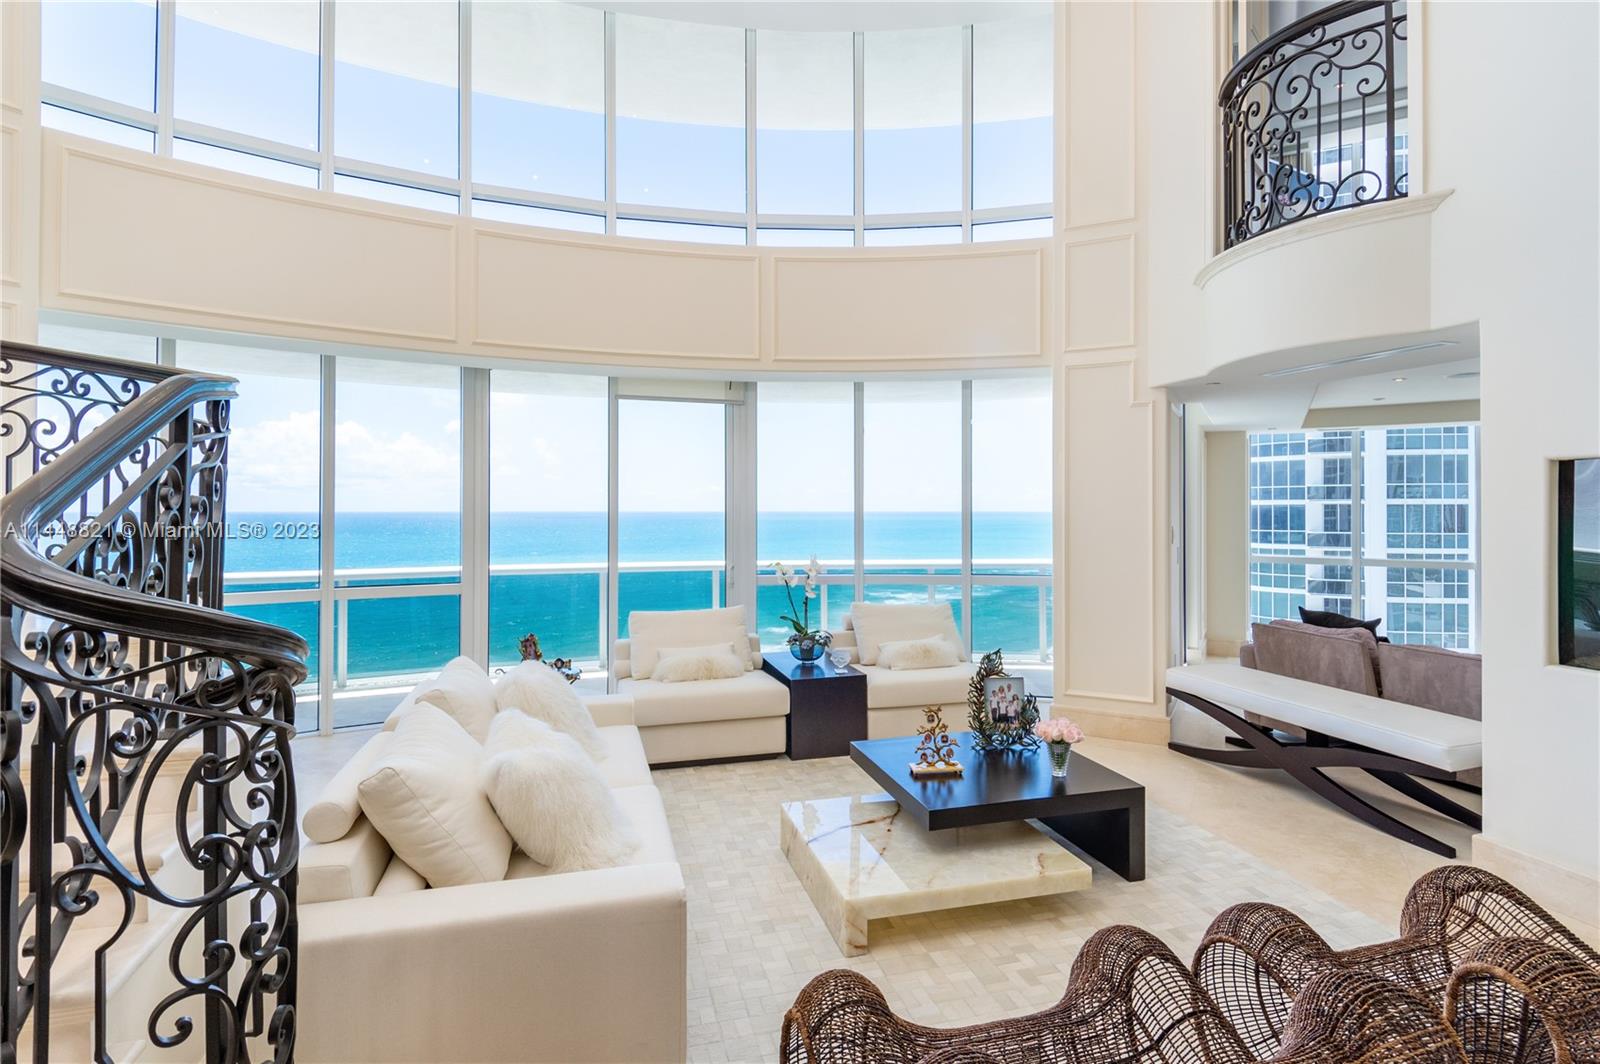 Located in the heart of Sunny Isles Beach, this property offers breathtaking oceanfront views and convenient access to the area's finest amenities. This spacious residence boasts 8,203 SF of living space, on the combined 17 & 18 floor, providing ample room for comfortable living. 7 beds, each designed with your comfort in mind. 8 full baths and 1 half bath with modern fixtures and finishes. A gourmet kitchen with top-of-the-line appliances, perfect for culinary enthusiasts. Spacious living and dining areas that flow seamlessly, ideal for entertaining. Enjoy ocean breezes and panoramic views from your 4 private balconies totaling 754 SF. This property is being offered for auction to the highest and best offer. Seeking Stalking Horse Bidder. Sale is subject to court approval.